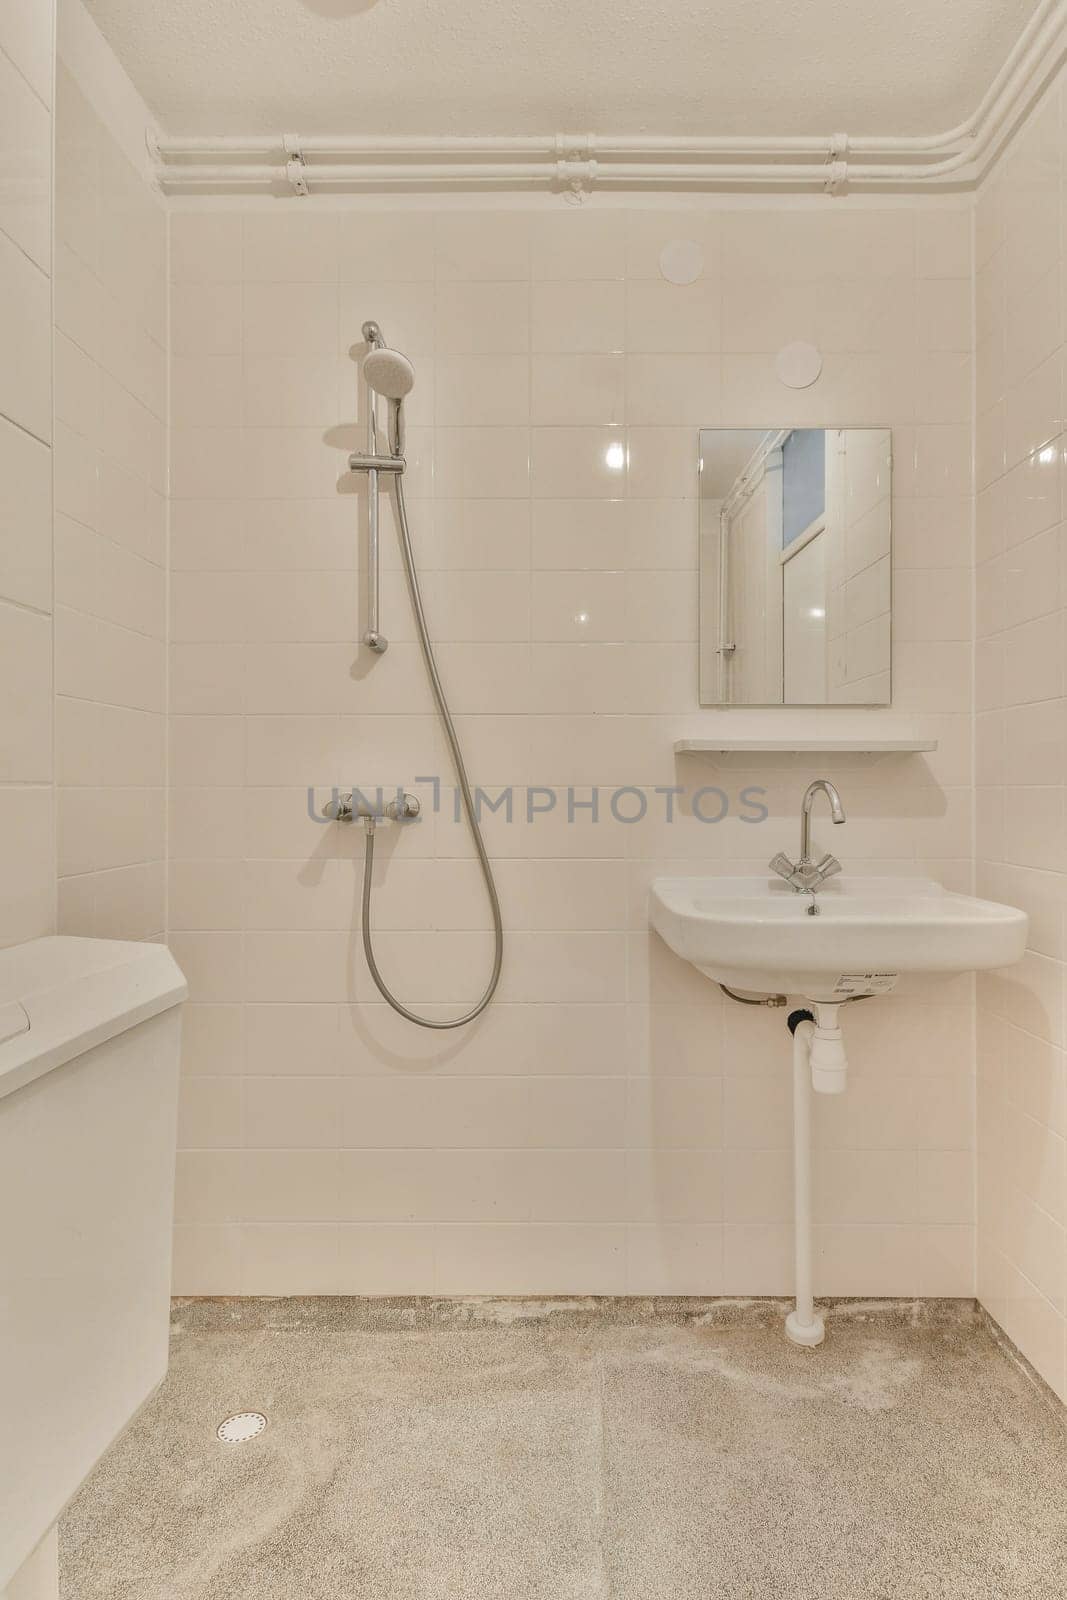 a bathroom with a toilet, sink and shower head mounted on the wall next to a mirror in the corner